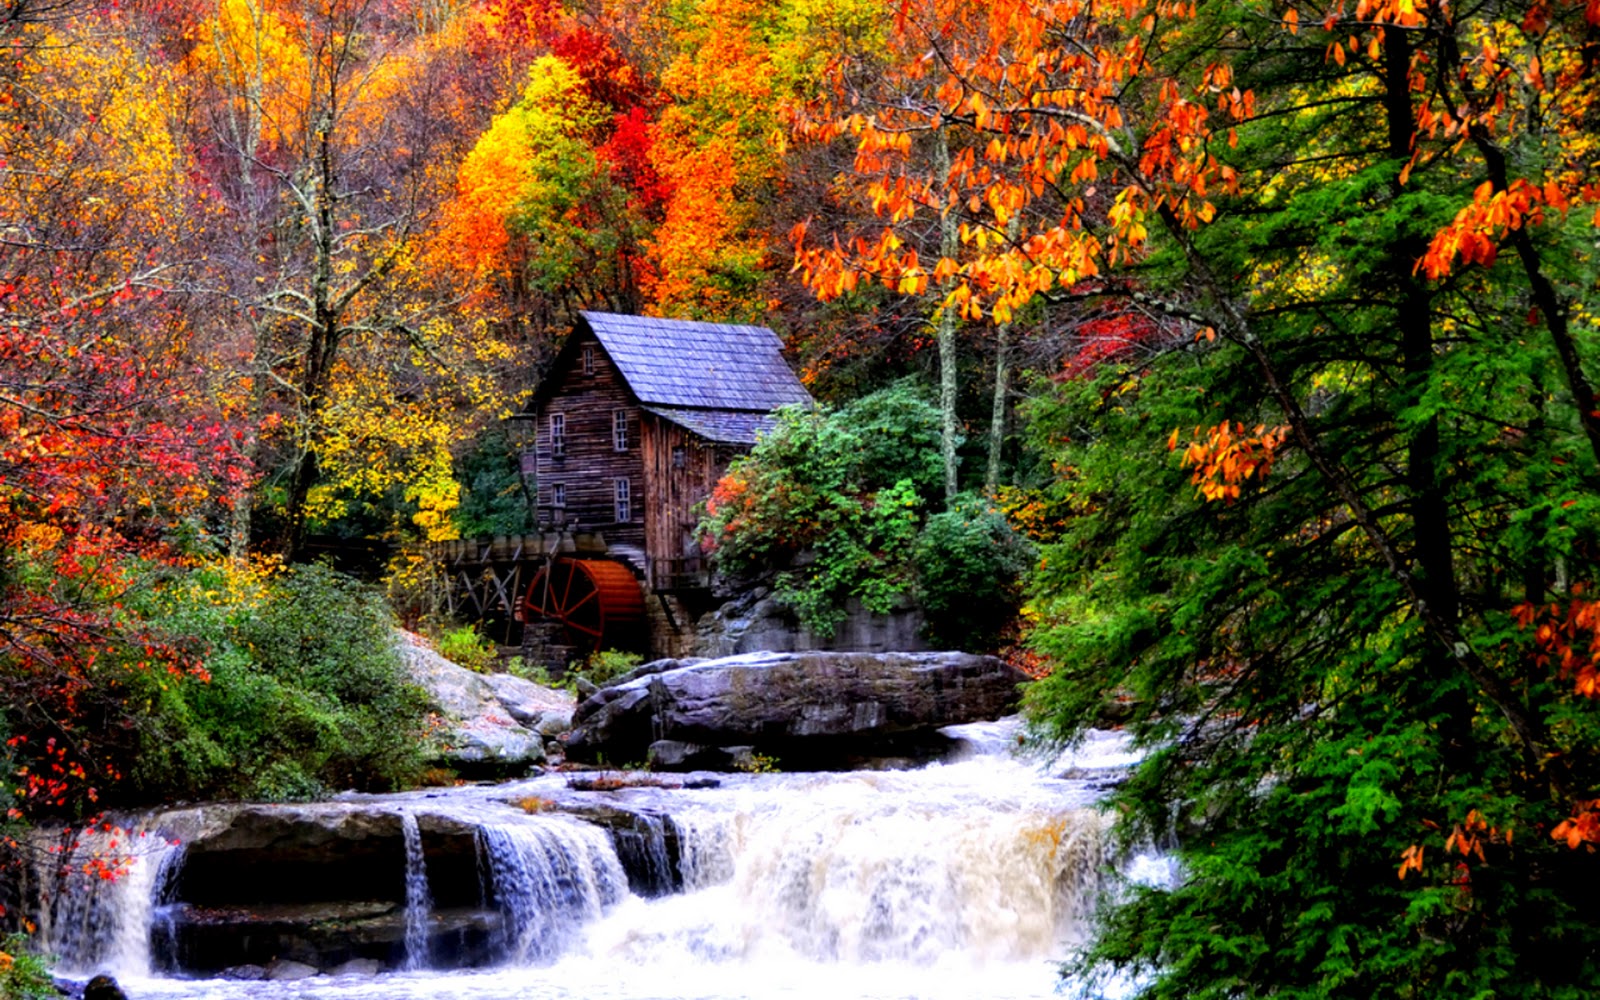 Autumn Waterfalls Is Original Article Written If You Find That